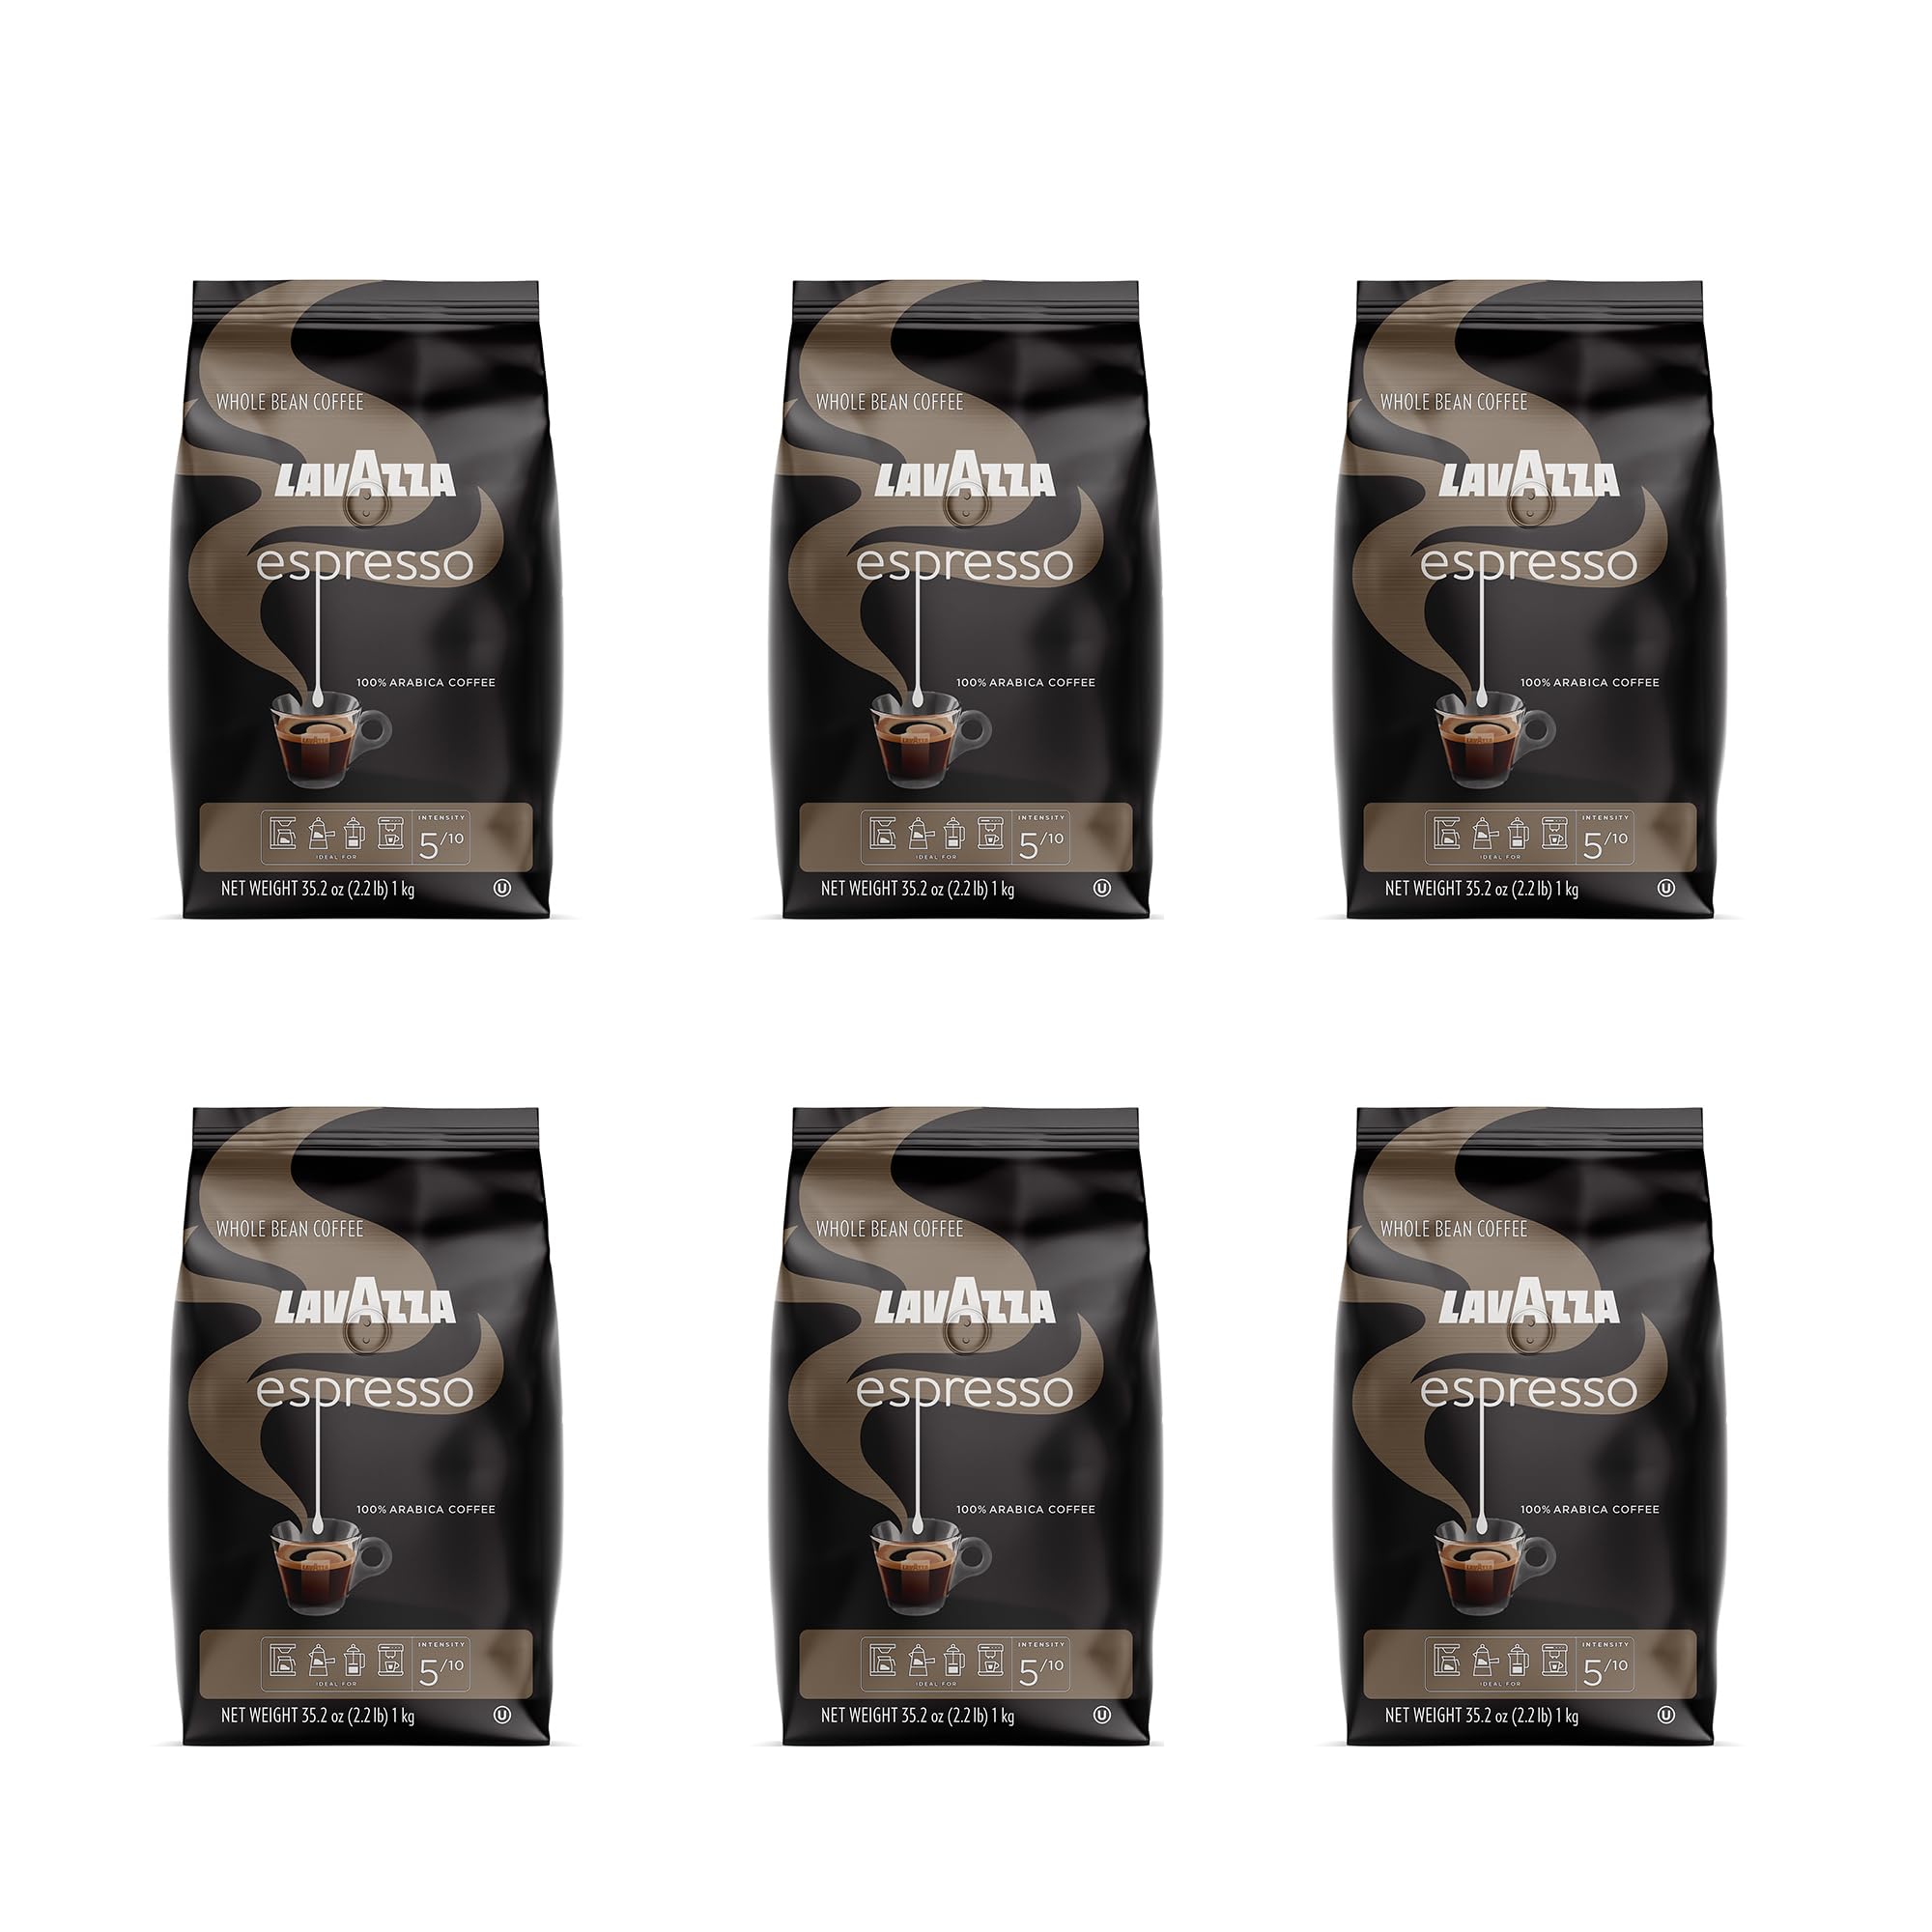 6-Pack 2.2lb Bags Lavazza Espresso Whole Bean Coffee Blend (Medium Roast) $49.65 ($8.28 each pack) w/ S&S + Free Shipping w/ Prime or on orders over $35